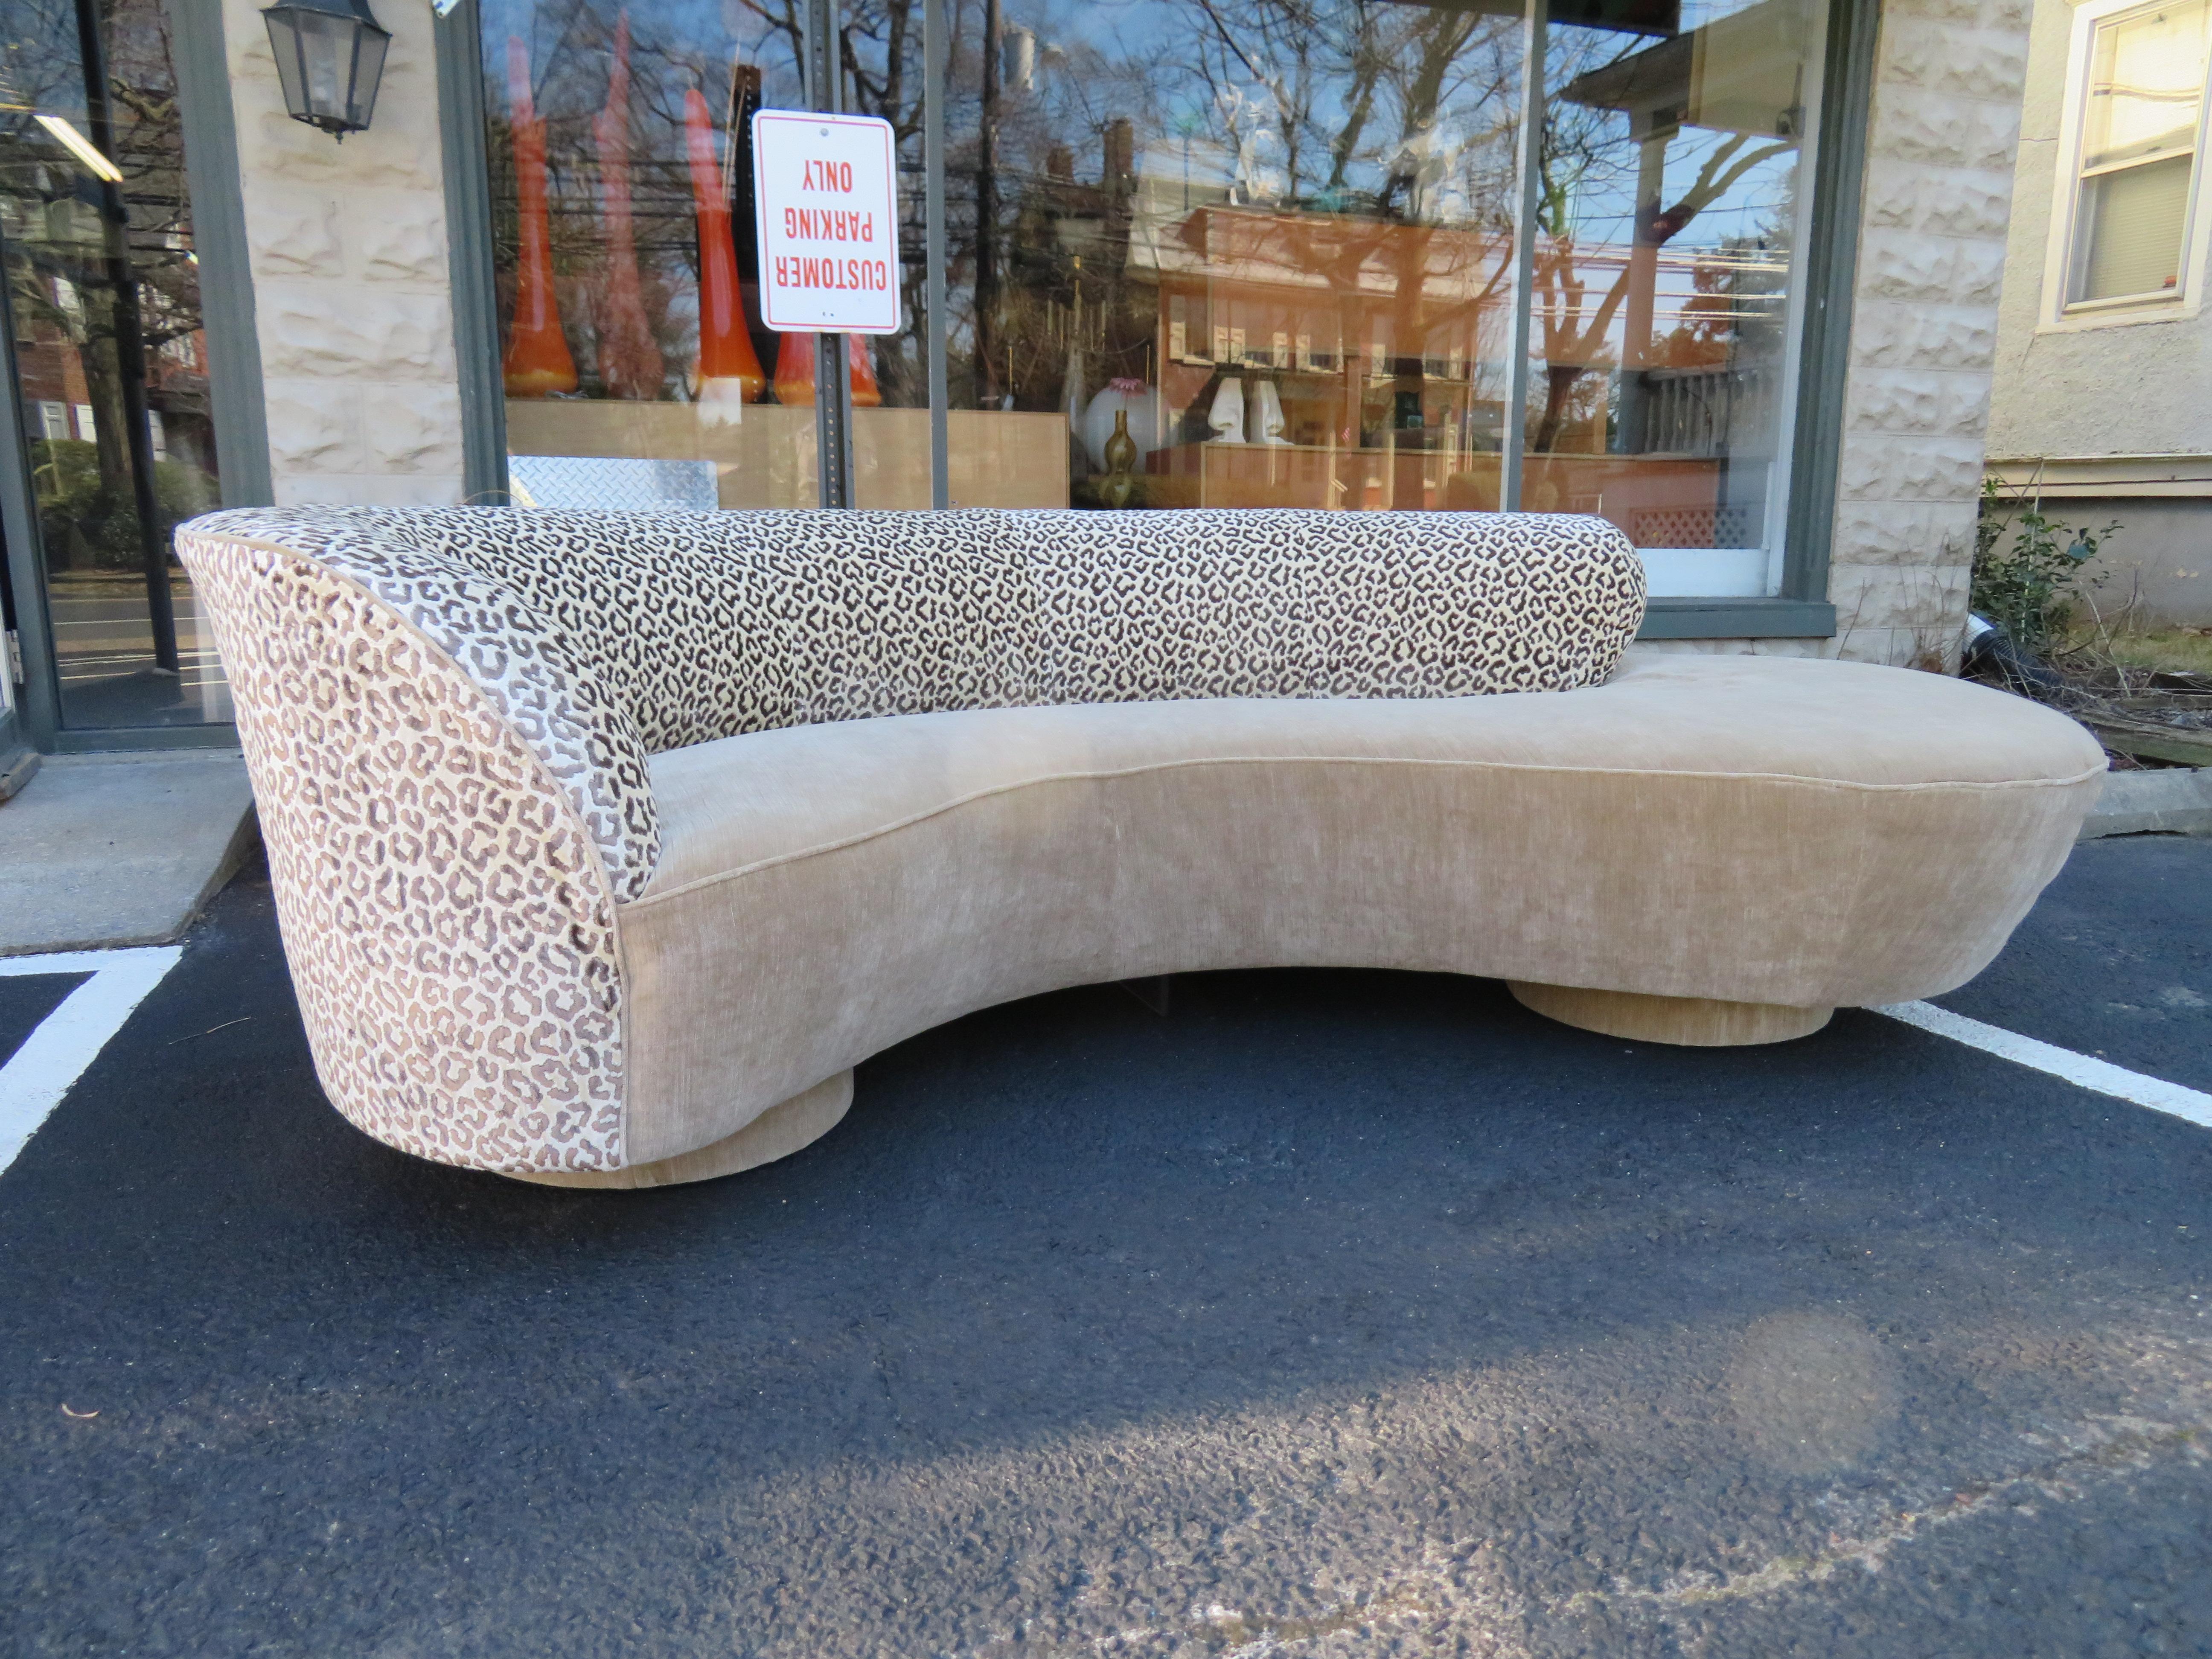 Stunning Vladimir Kagan curved serpentine cloud sofa for Directional. We are loving the Brunschwig and Fils and Dongia fabric this sofa has been re-upholstered with about 15 years ago-still looks great!